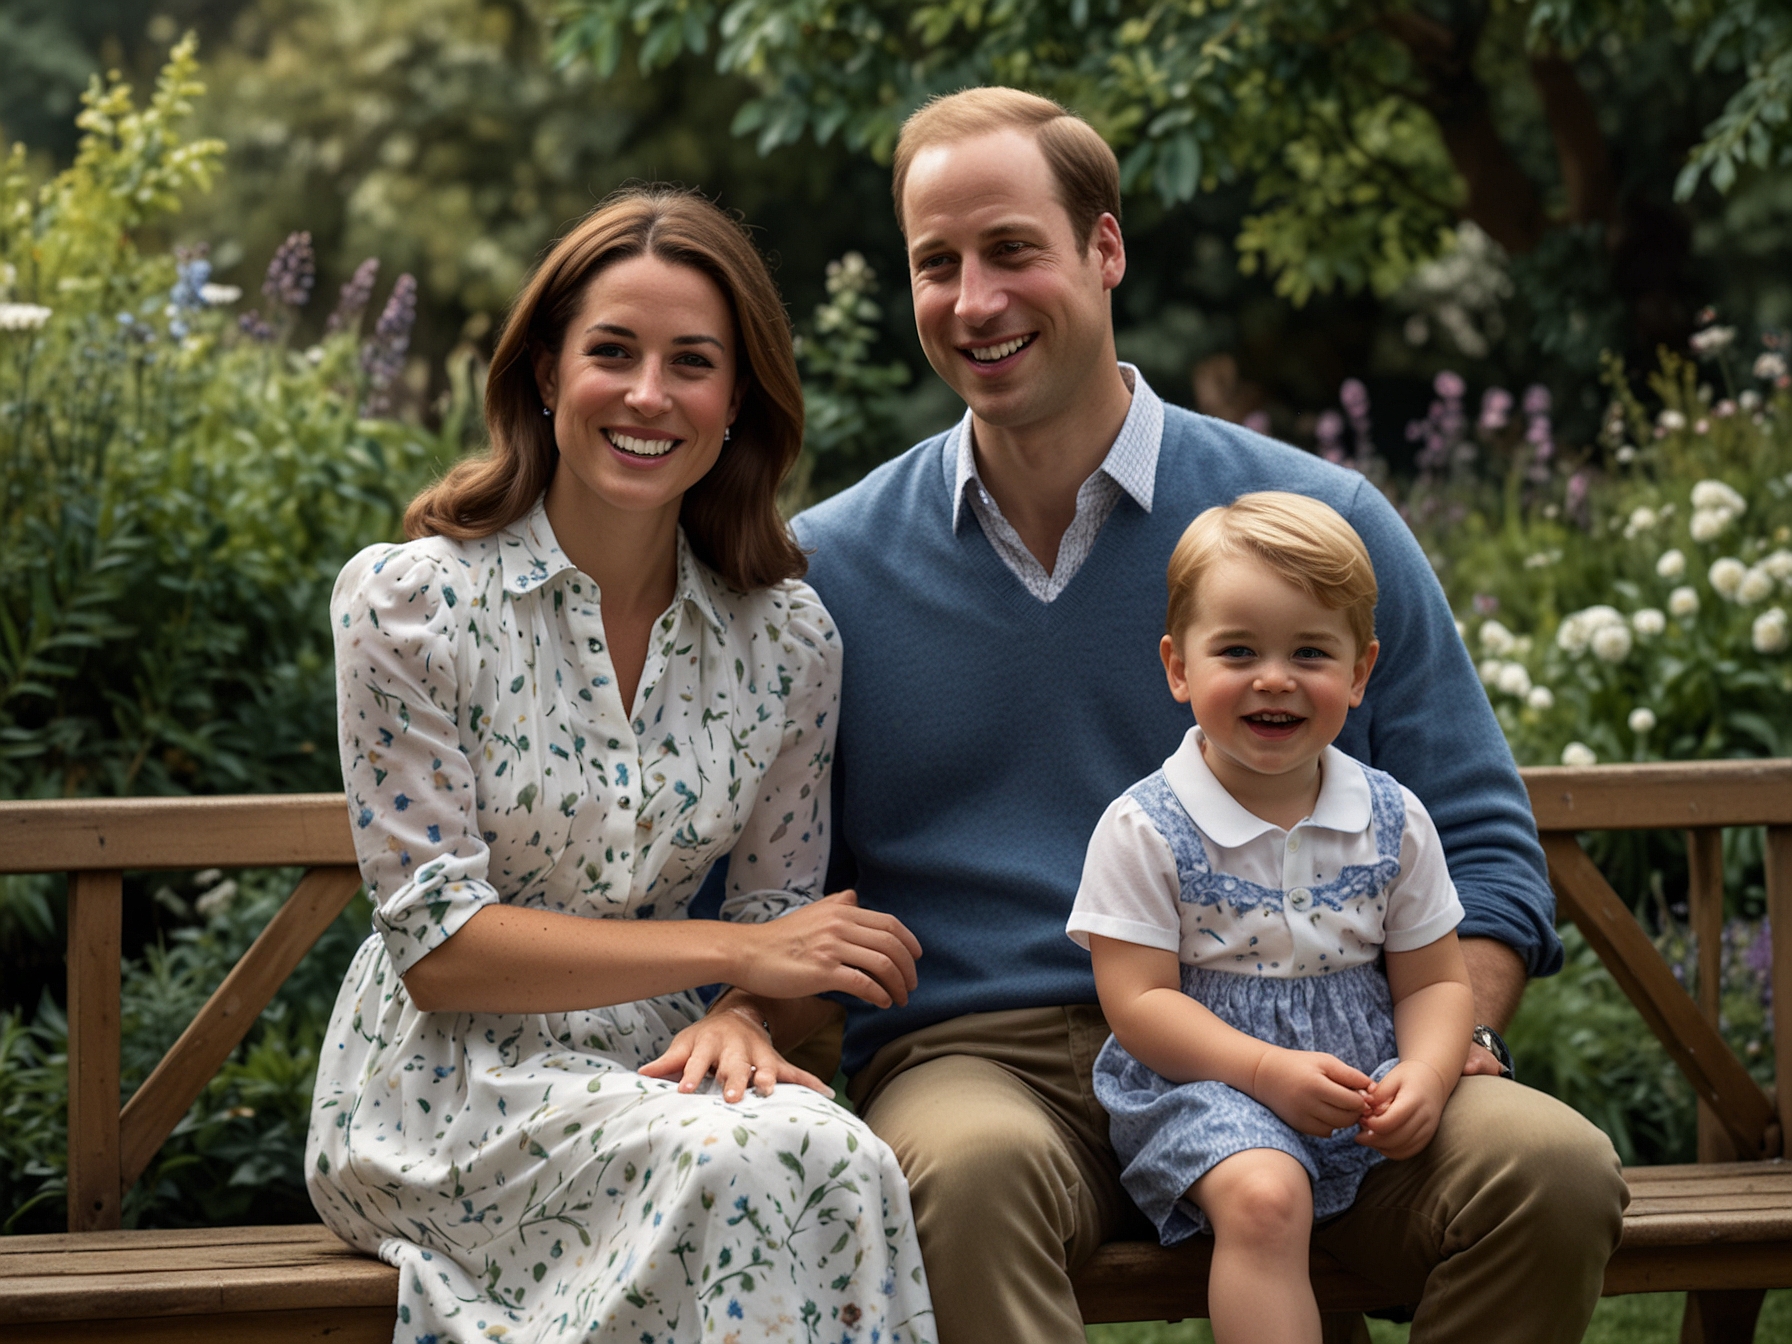 Prince William enjoys a light-hearted moment with Prince George, Princess Charlotte, and Prince Louis in a picturesque garden.